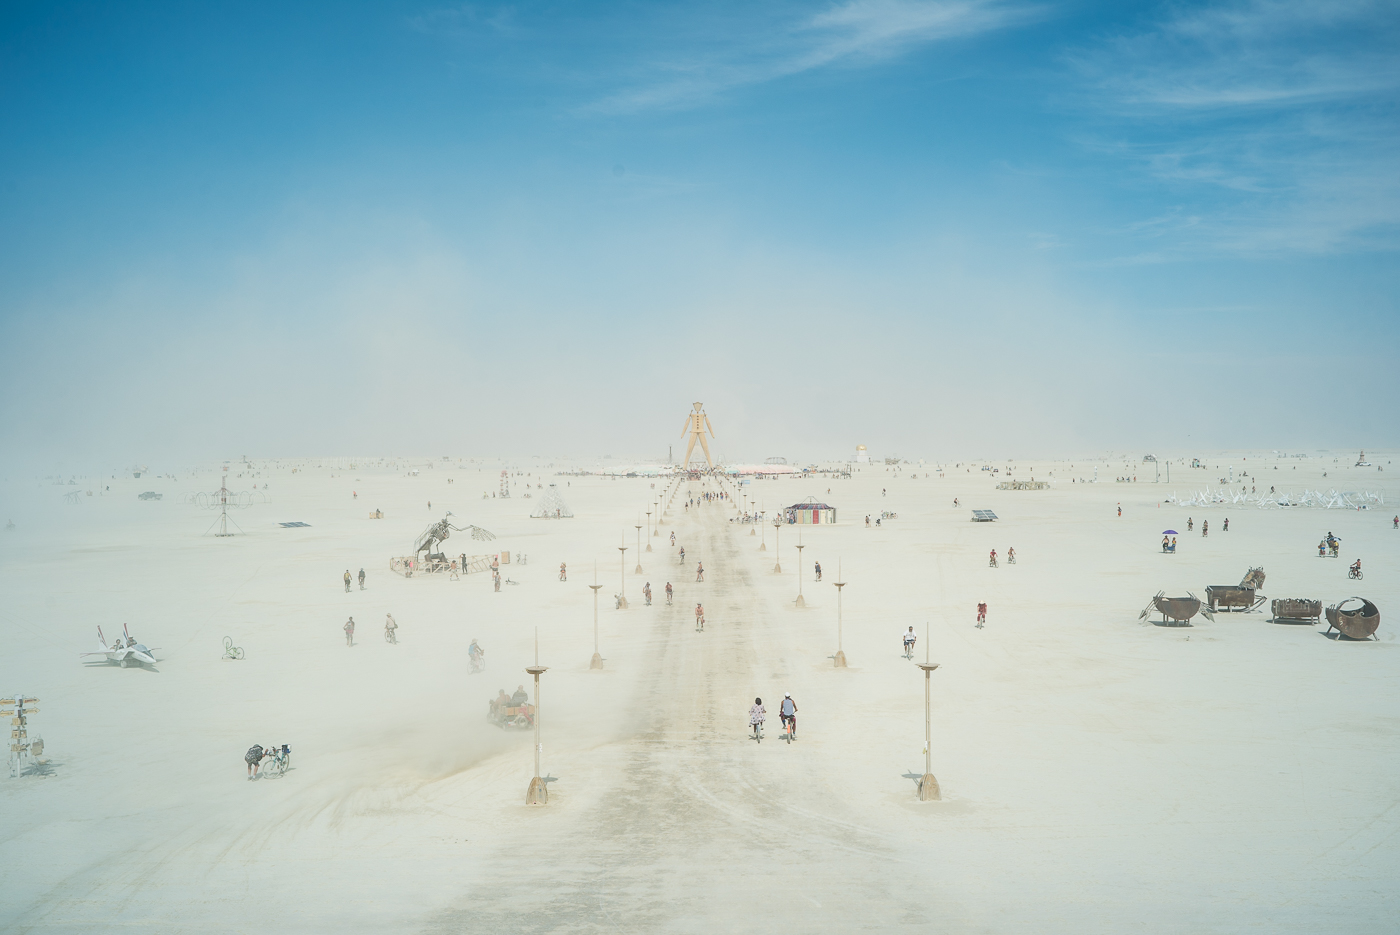 The Man in the Dust, Burning Man 2014: In Dust We Trust - Photos of a Dusty Playa